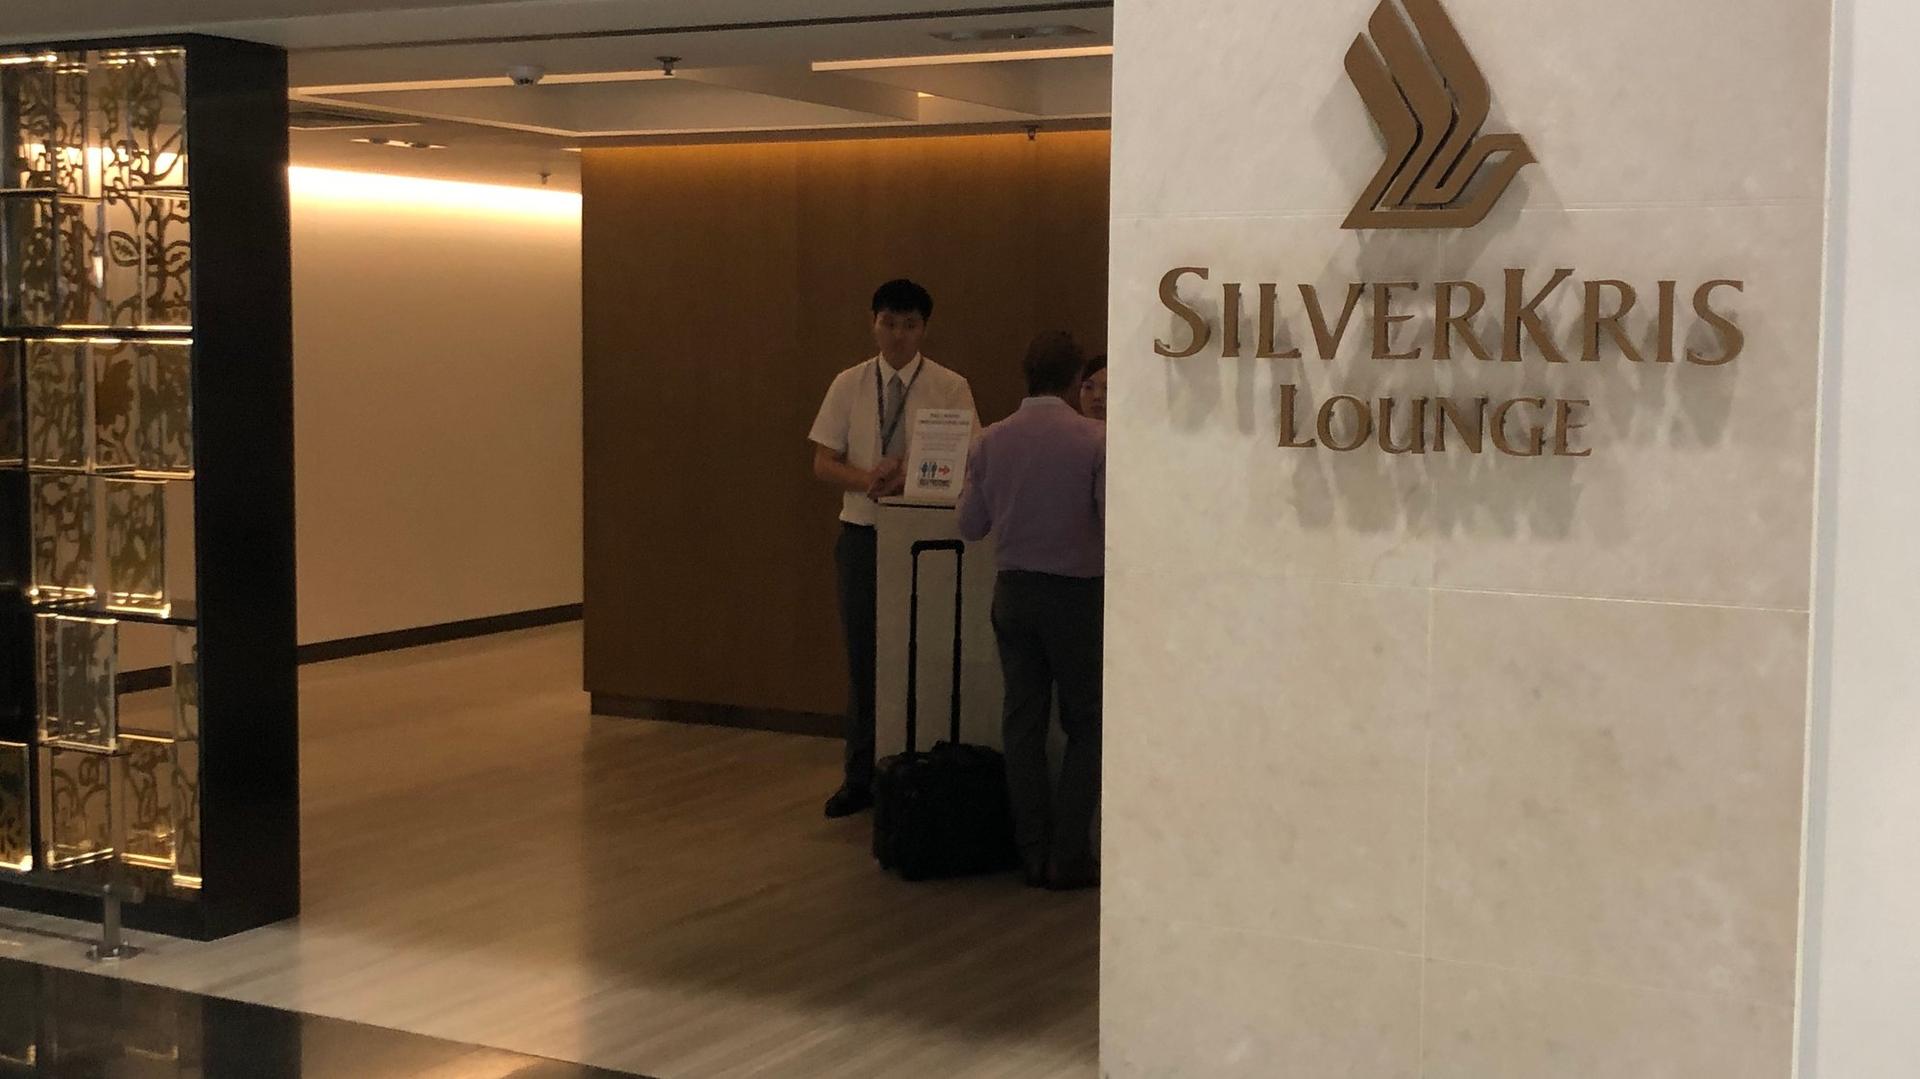 Singapore Airlines SilverKris Business Class Lounge image 23 of 68